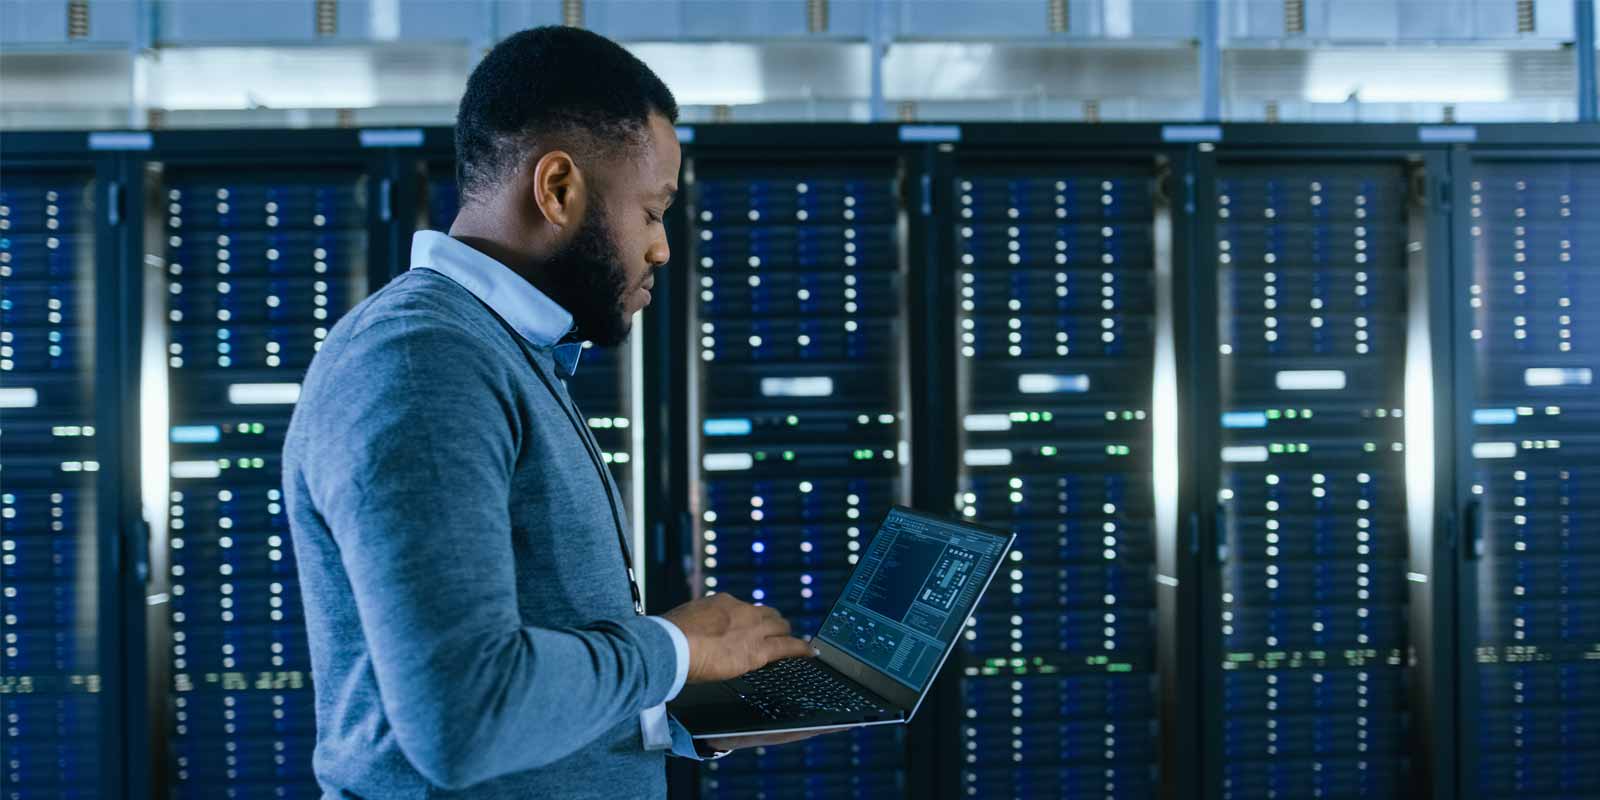 Man with laptop in front of servers